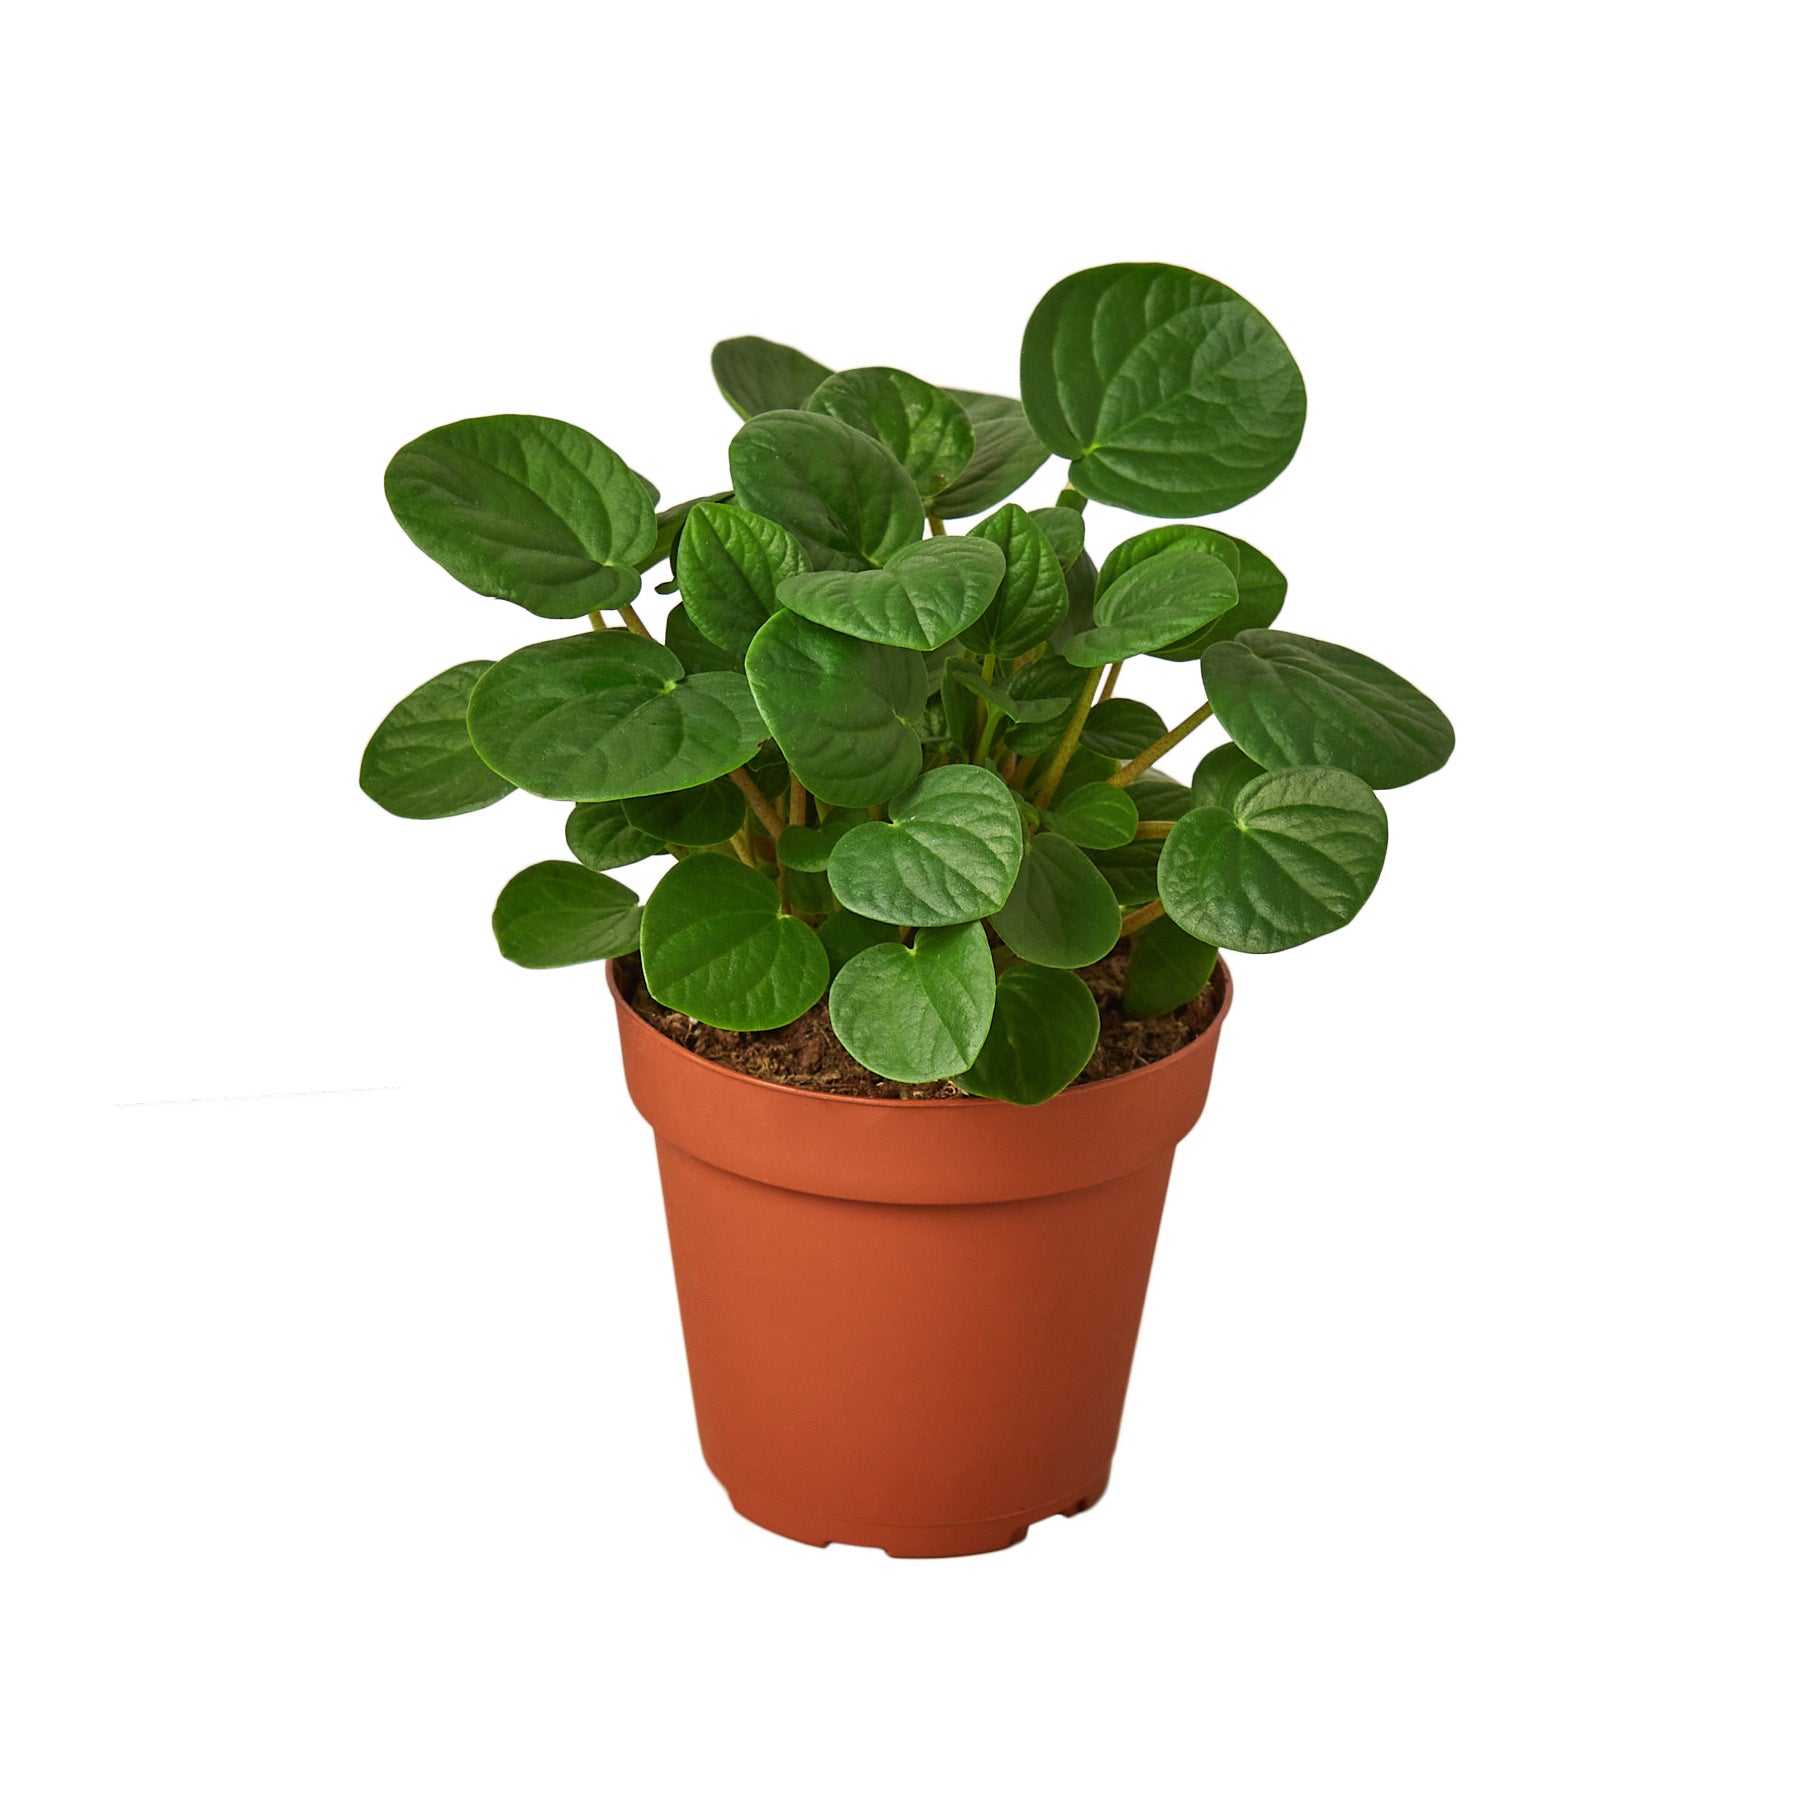 A small plant in a pot on a white background near me.